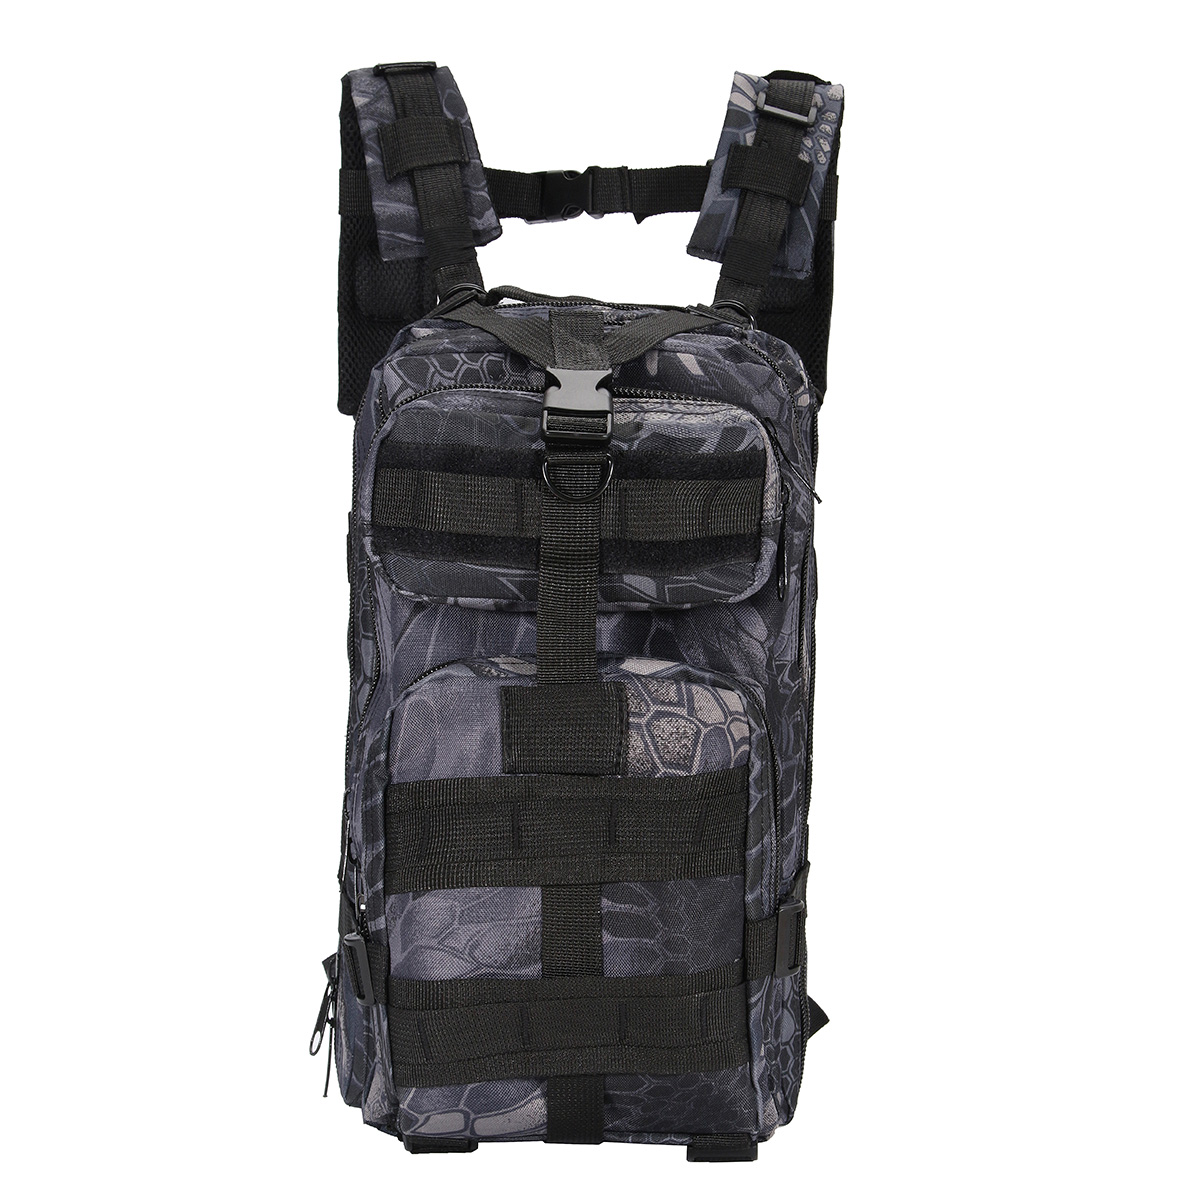 20L Men Tactical Military Backpack Rucksack Camping Hiking Trekking Camouflage Bag Outdoor Military Army Tactical Backpack